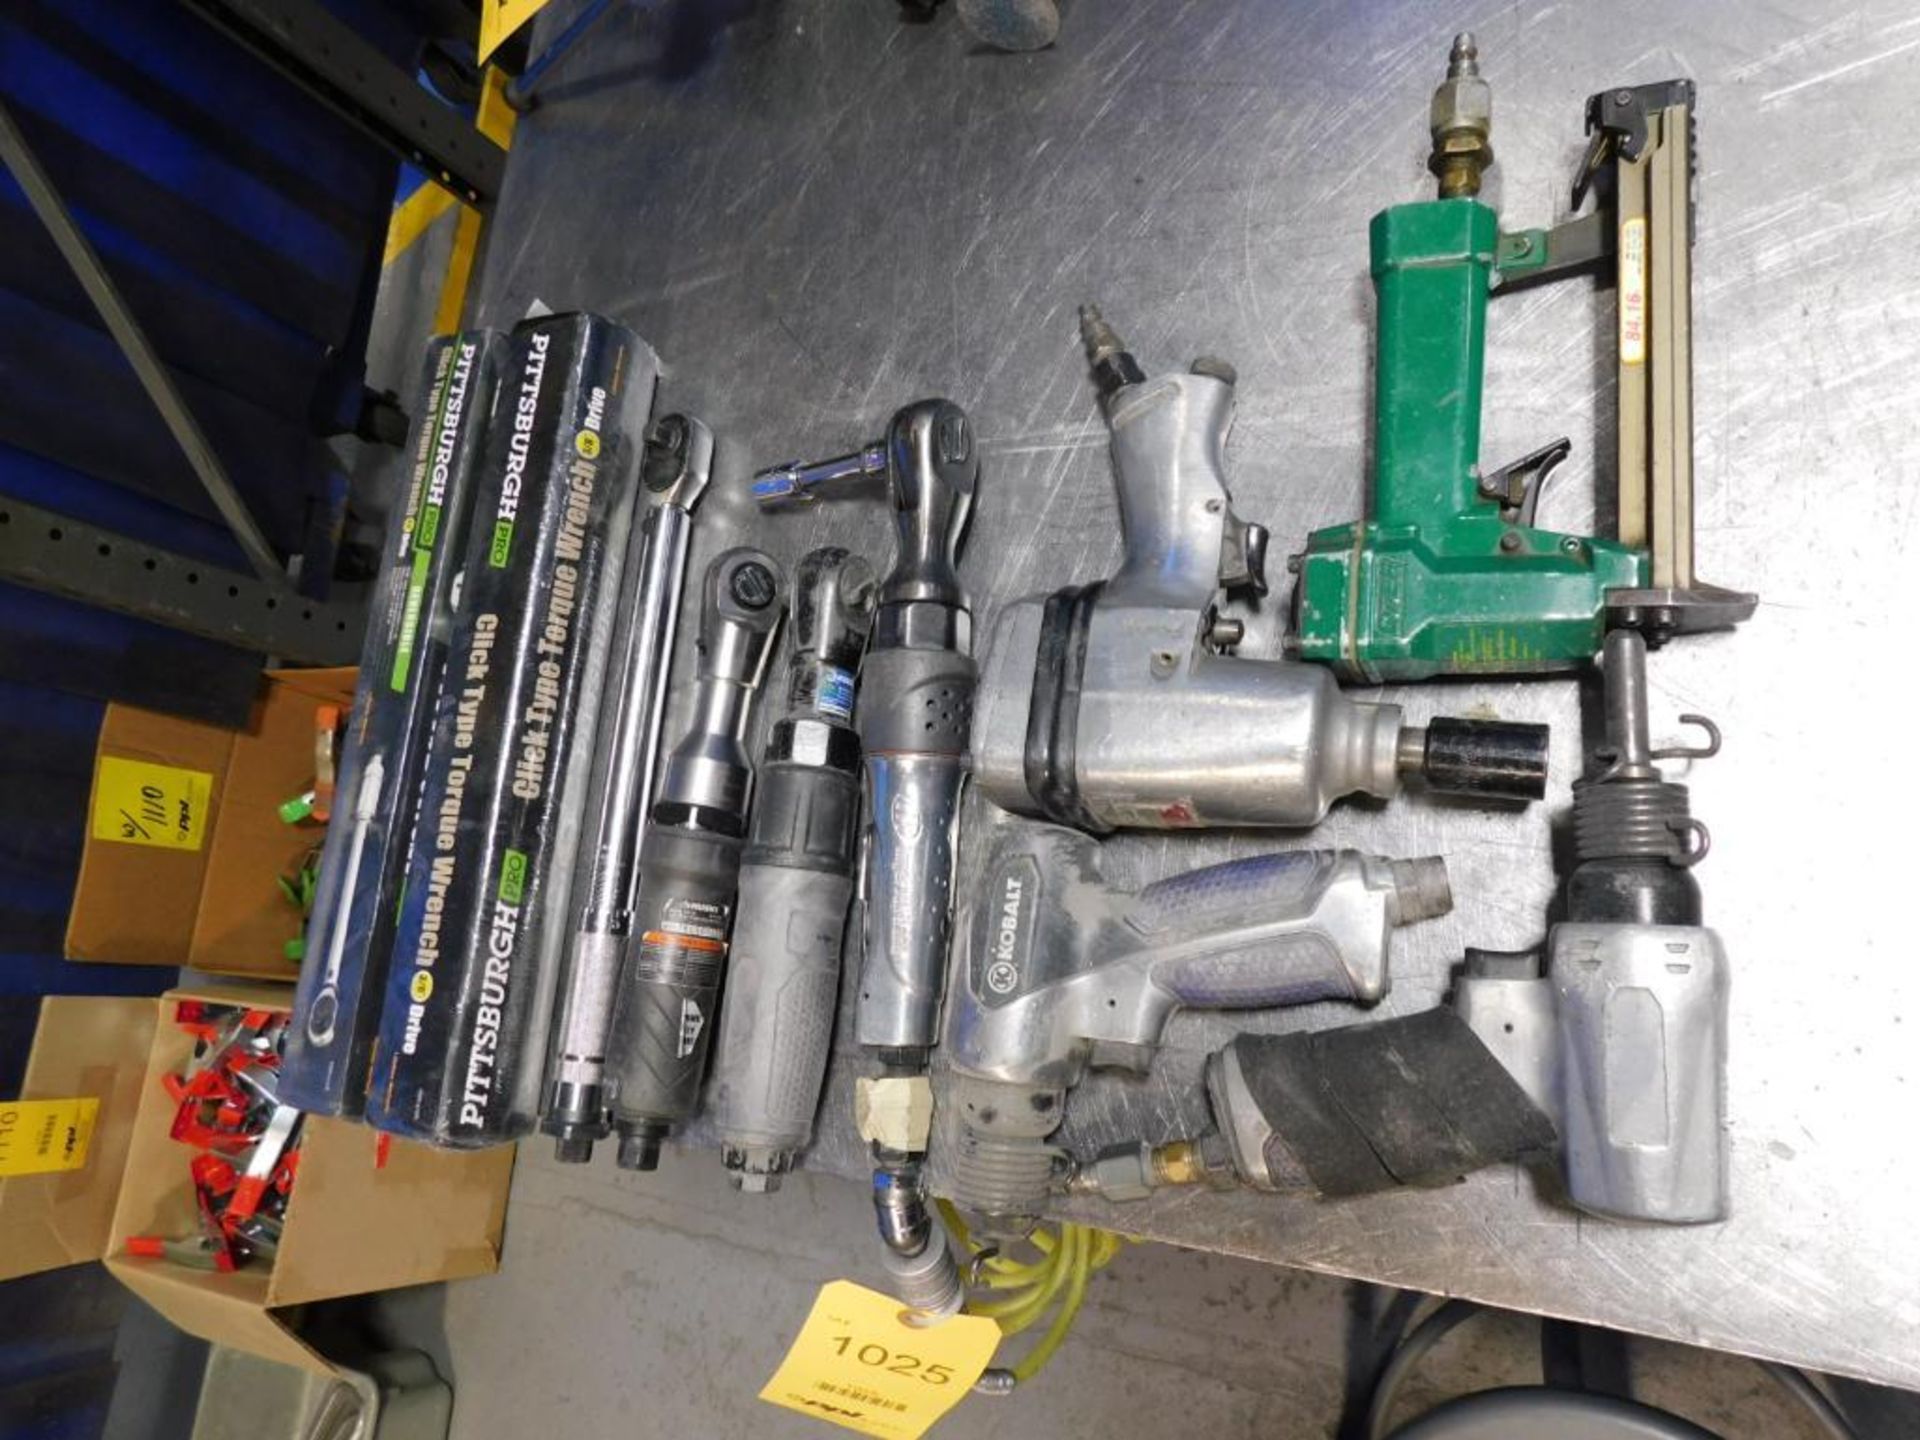 LOT: Assorted Pnuematic Ratchets, Impacts, Chisels, Torque Wrenches - Image 5 of 5